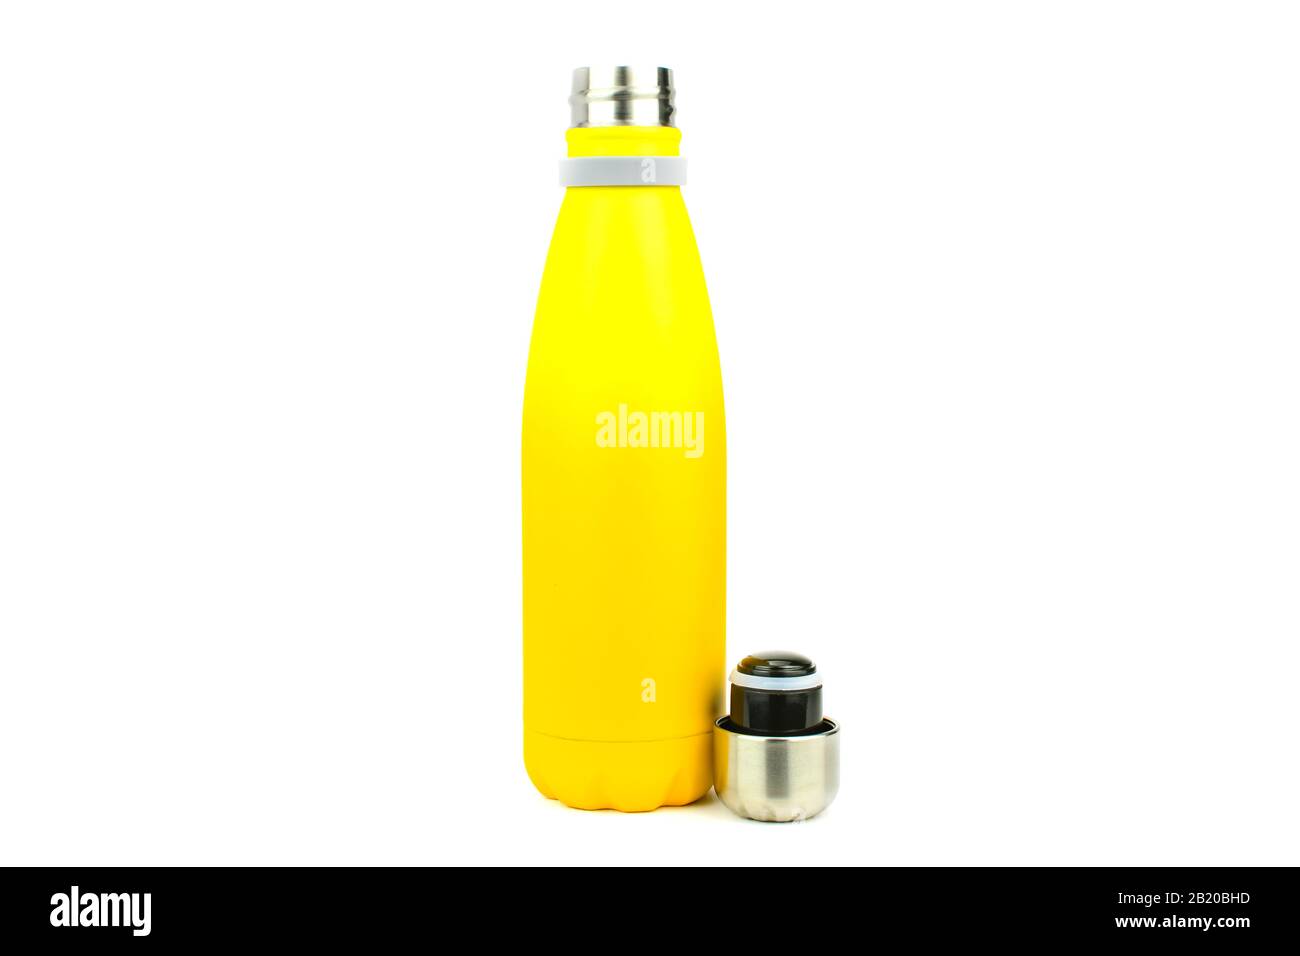 https://c8.alamy.com/comp/2B20BHD/stainless-thermos-flask-water-bottle-isolated-on-white-background-light-green-and-yellow-color-2B20BHD.jpg